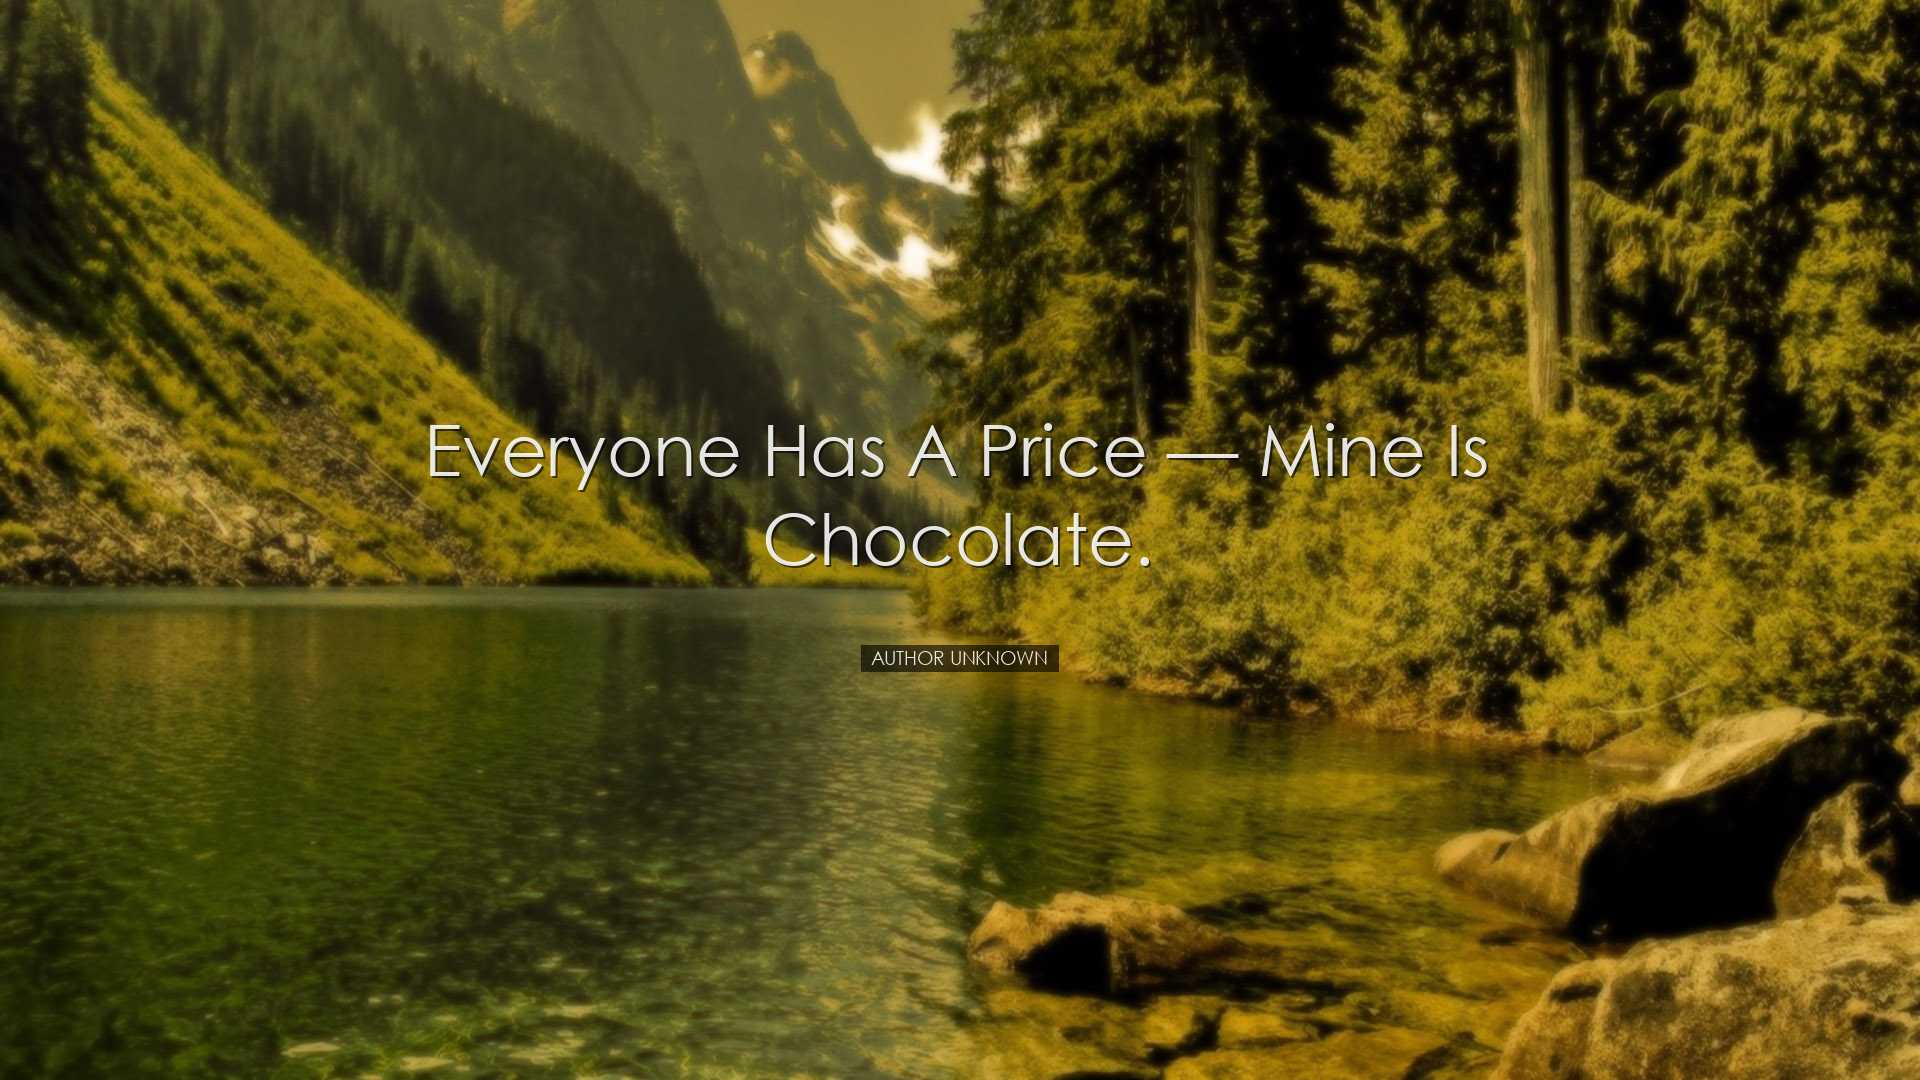 Everyone has a price — mine is chocolate. - Author Unknown